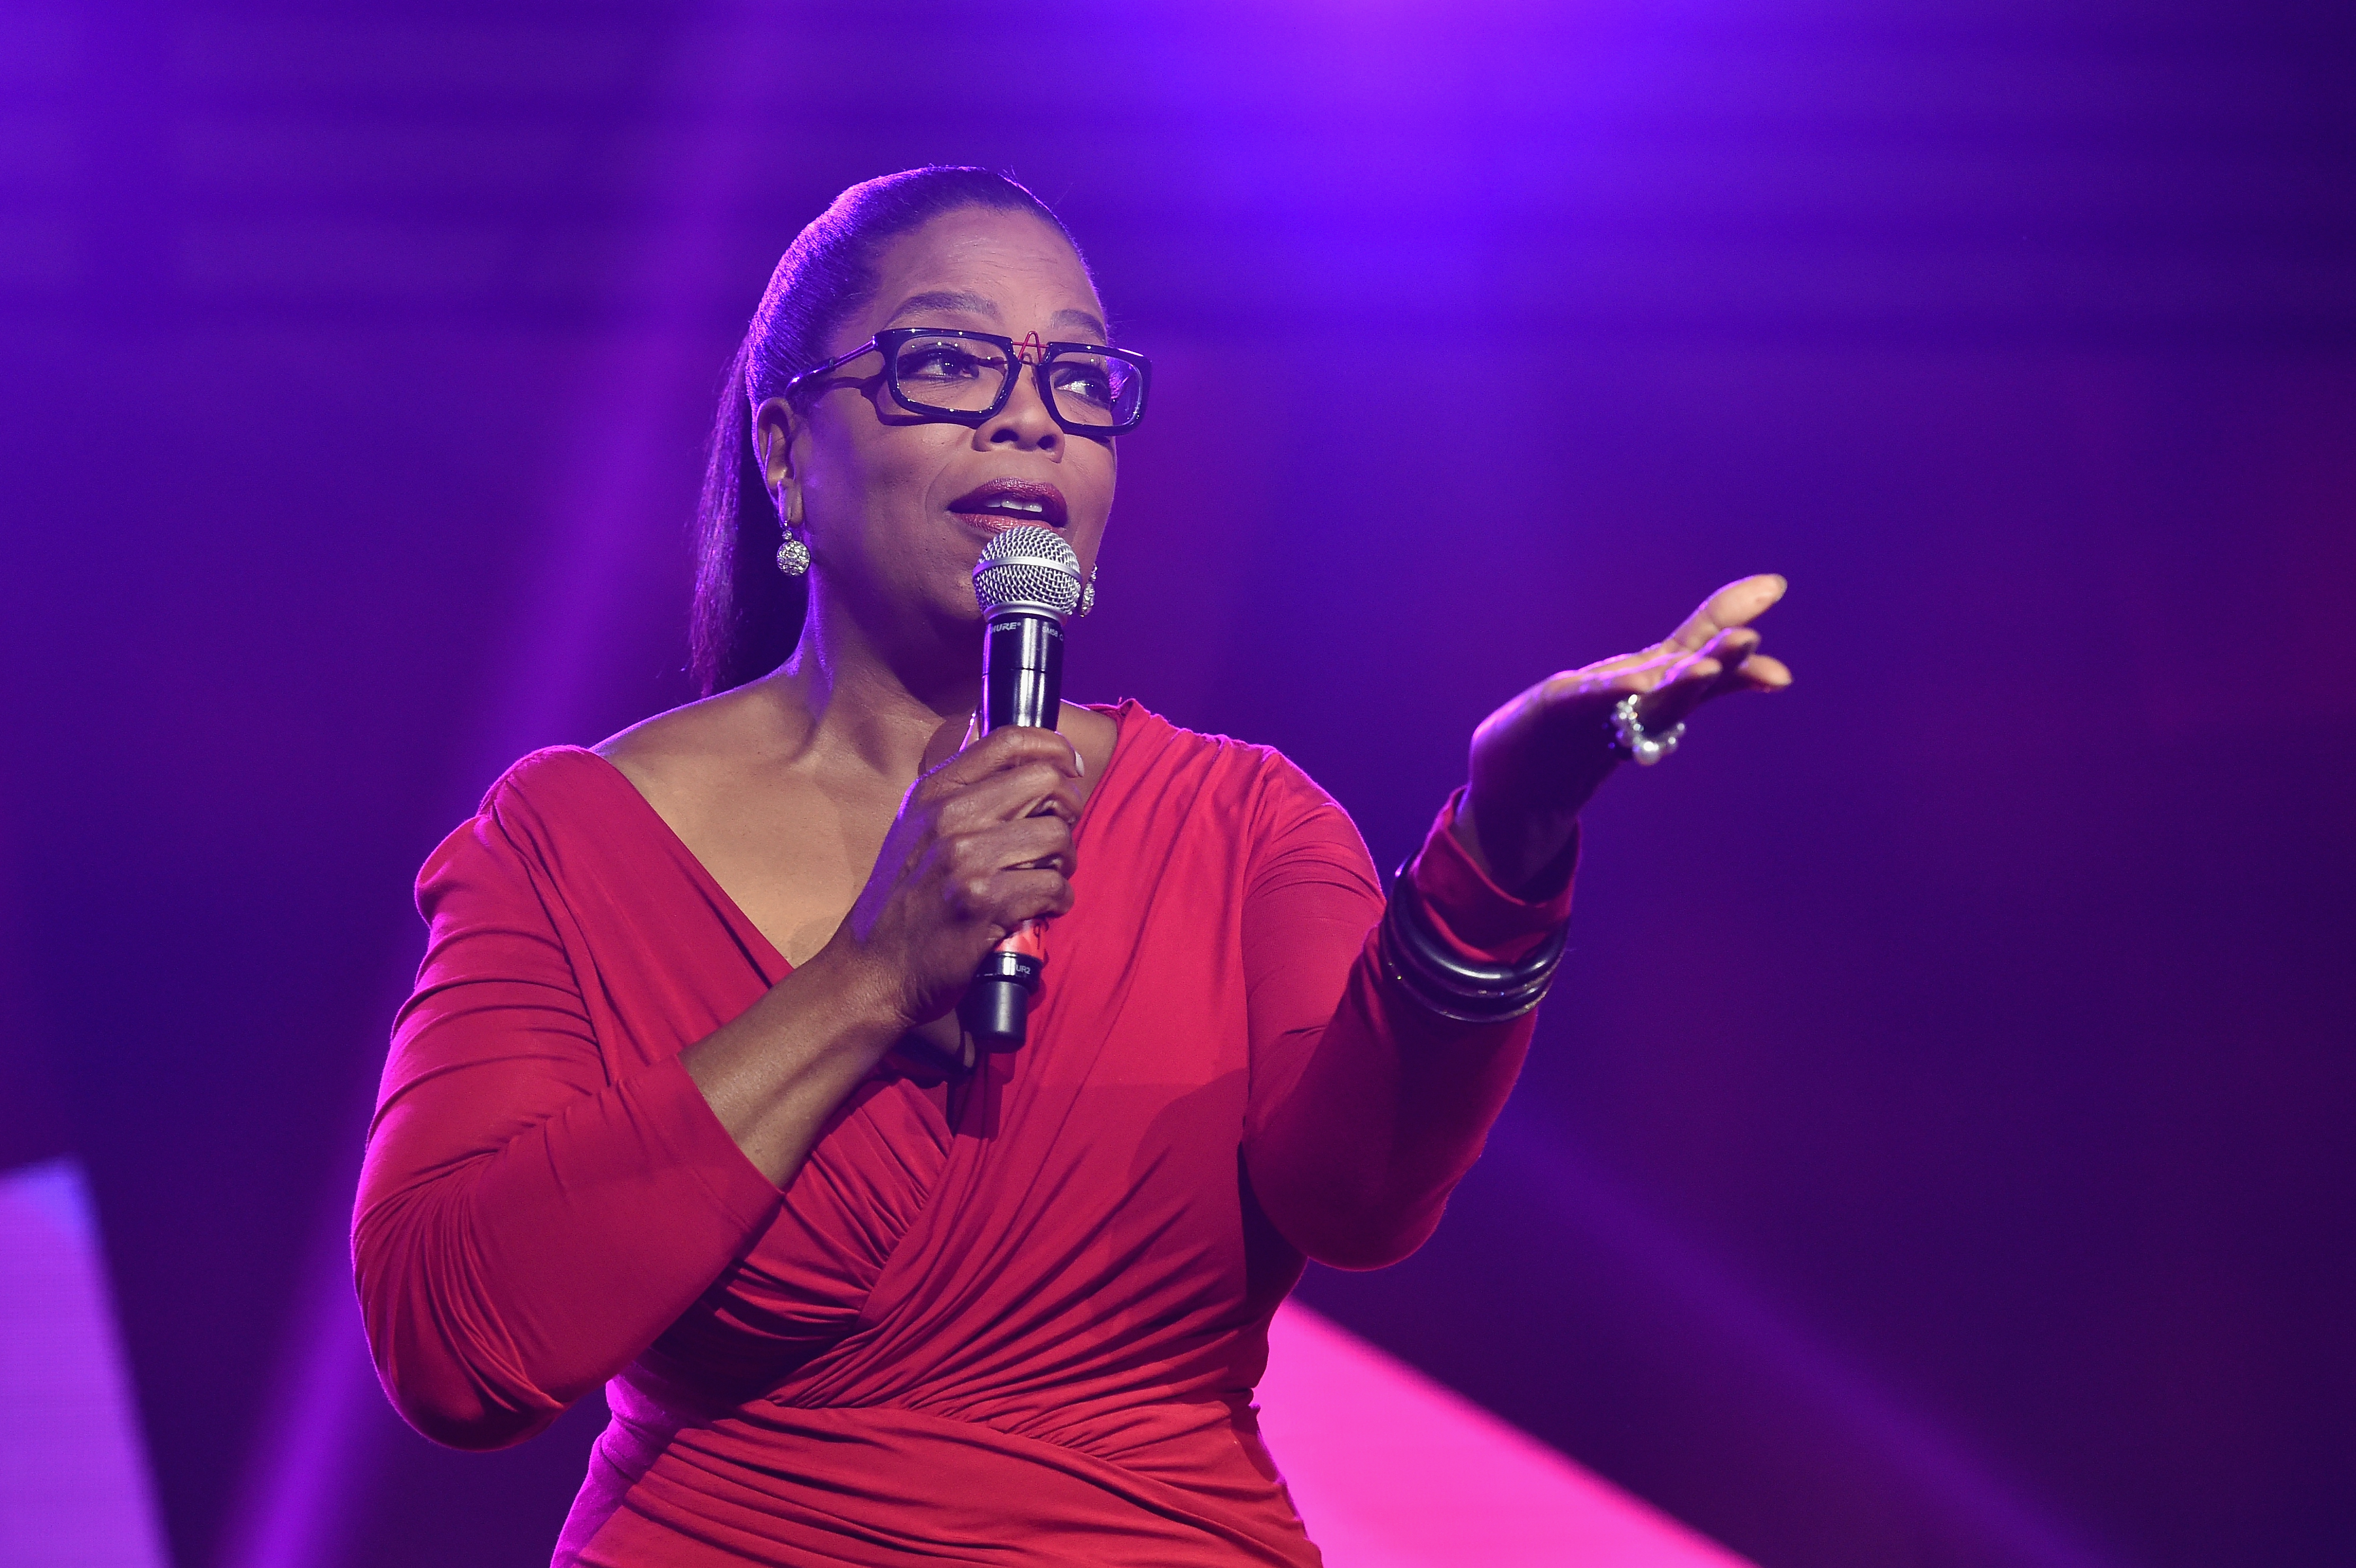 Oprah Winfrey has one of the most amazing modern rags-to-riches stories of all time.